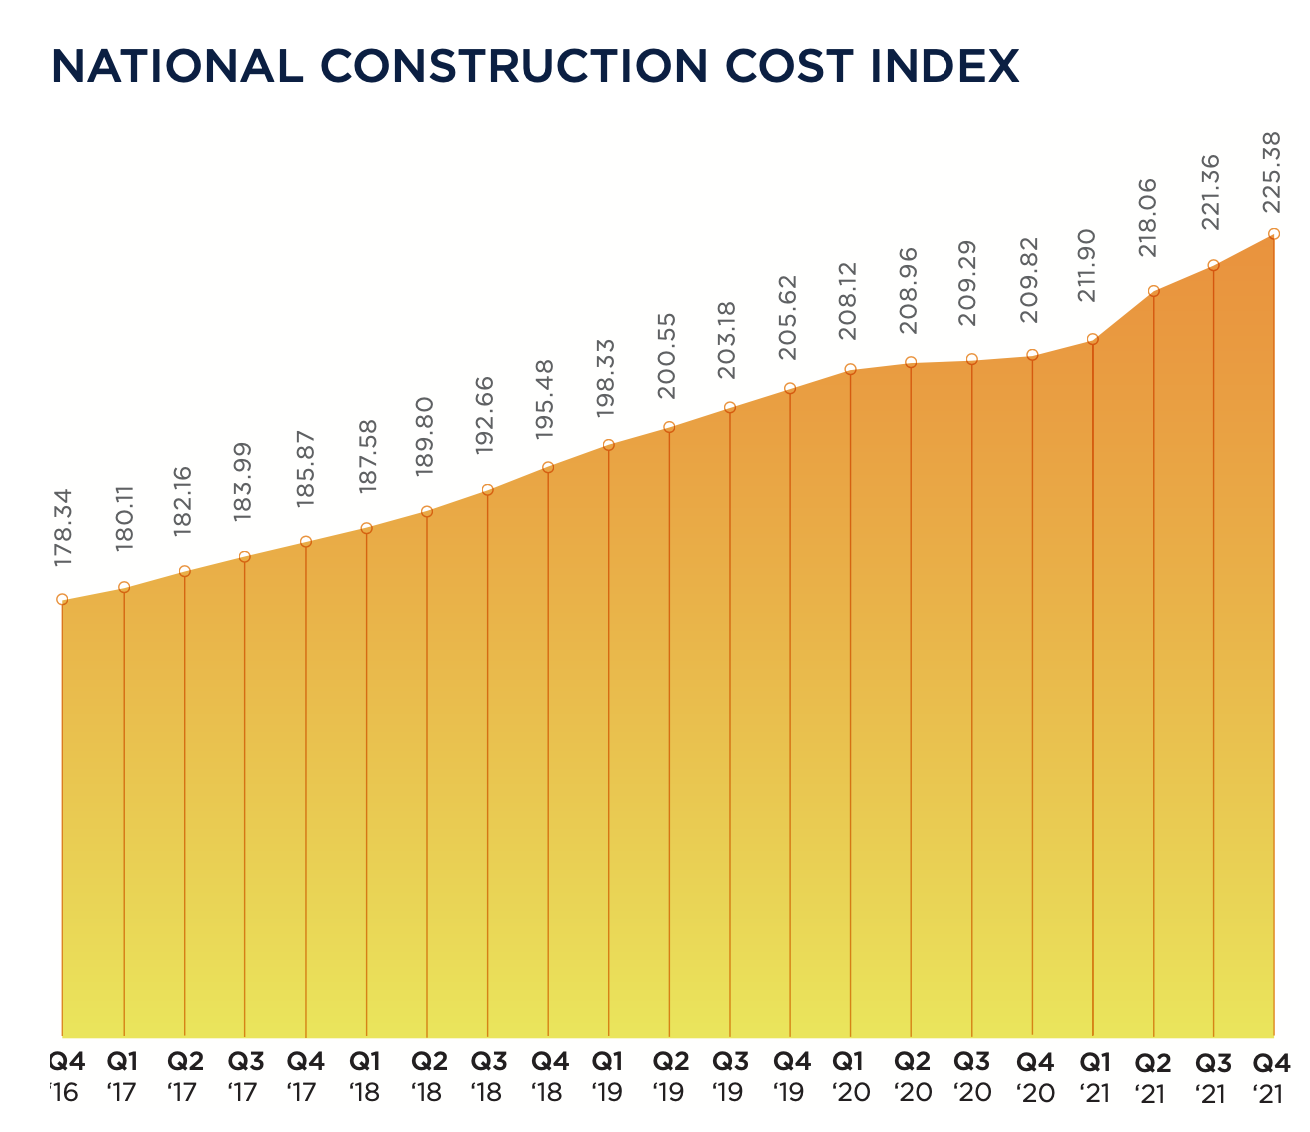 Construction costs rose 7.4 percent last year.